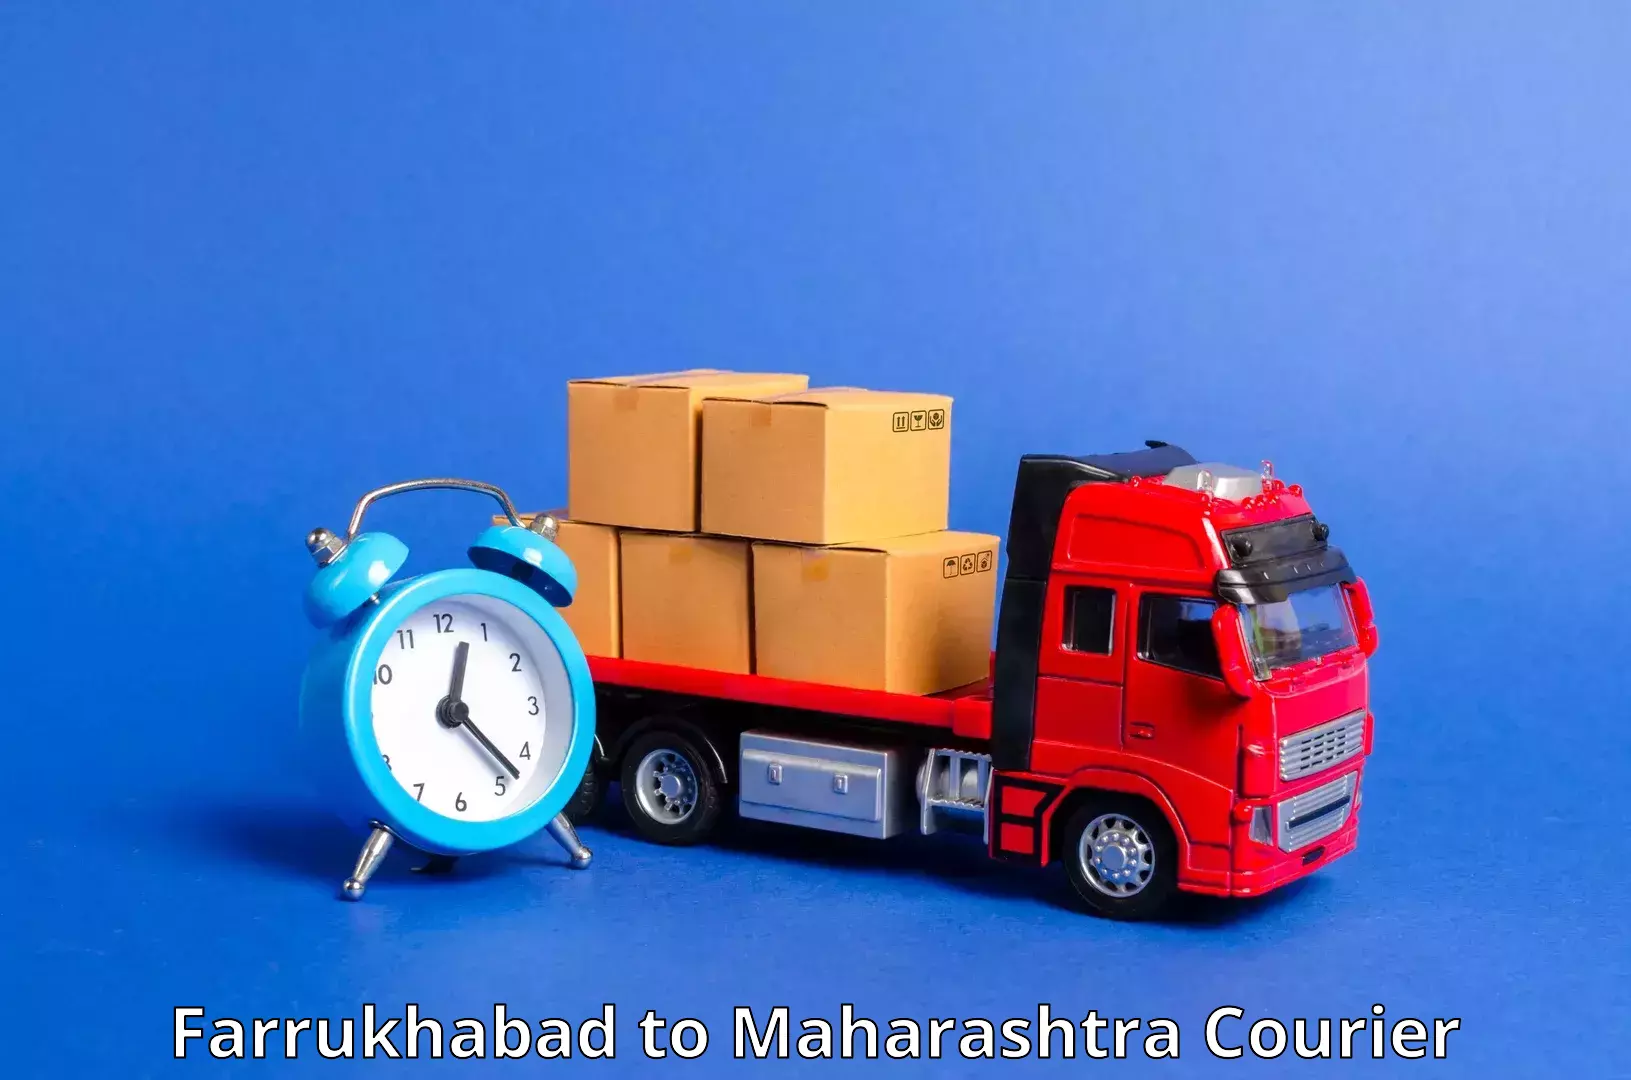 User-friendly delivery service Farrukhabad to Aheri